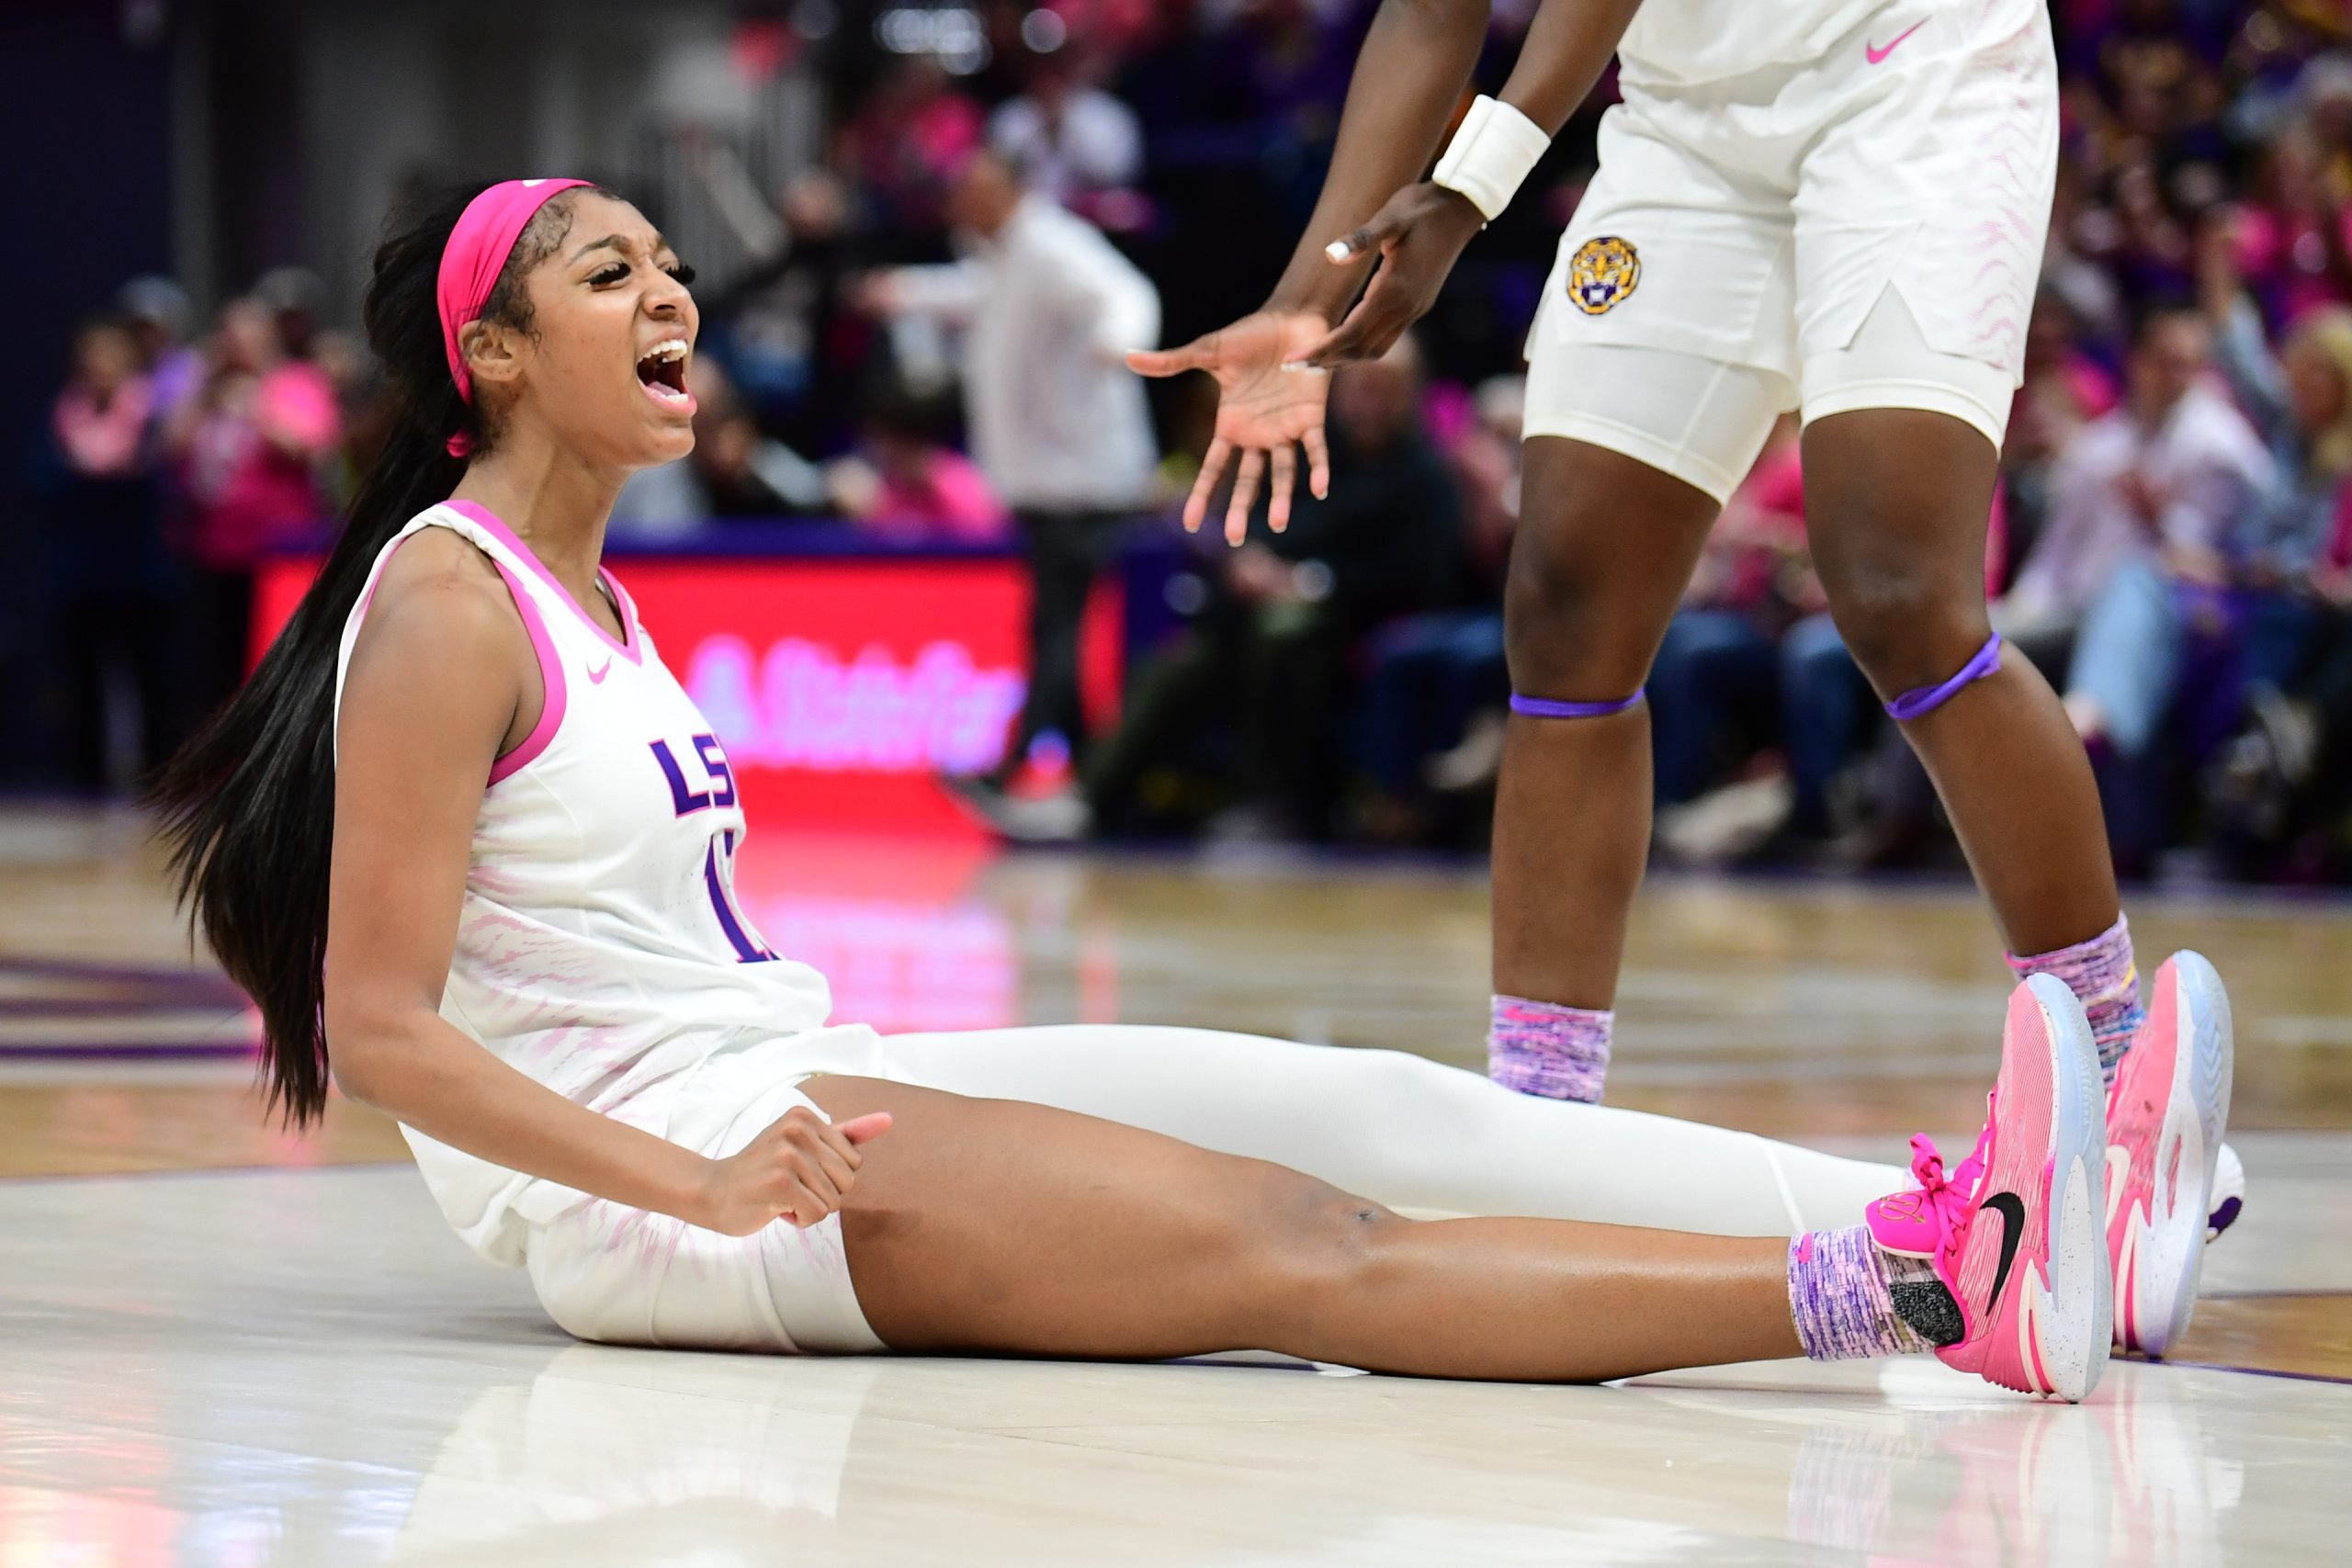 Oh Heavens: LSU's Angel Reese delivers career-high 36 points, 20 rebounds  to lead No. 5 Tigers past Ole Miss